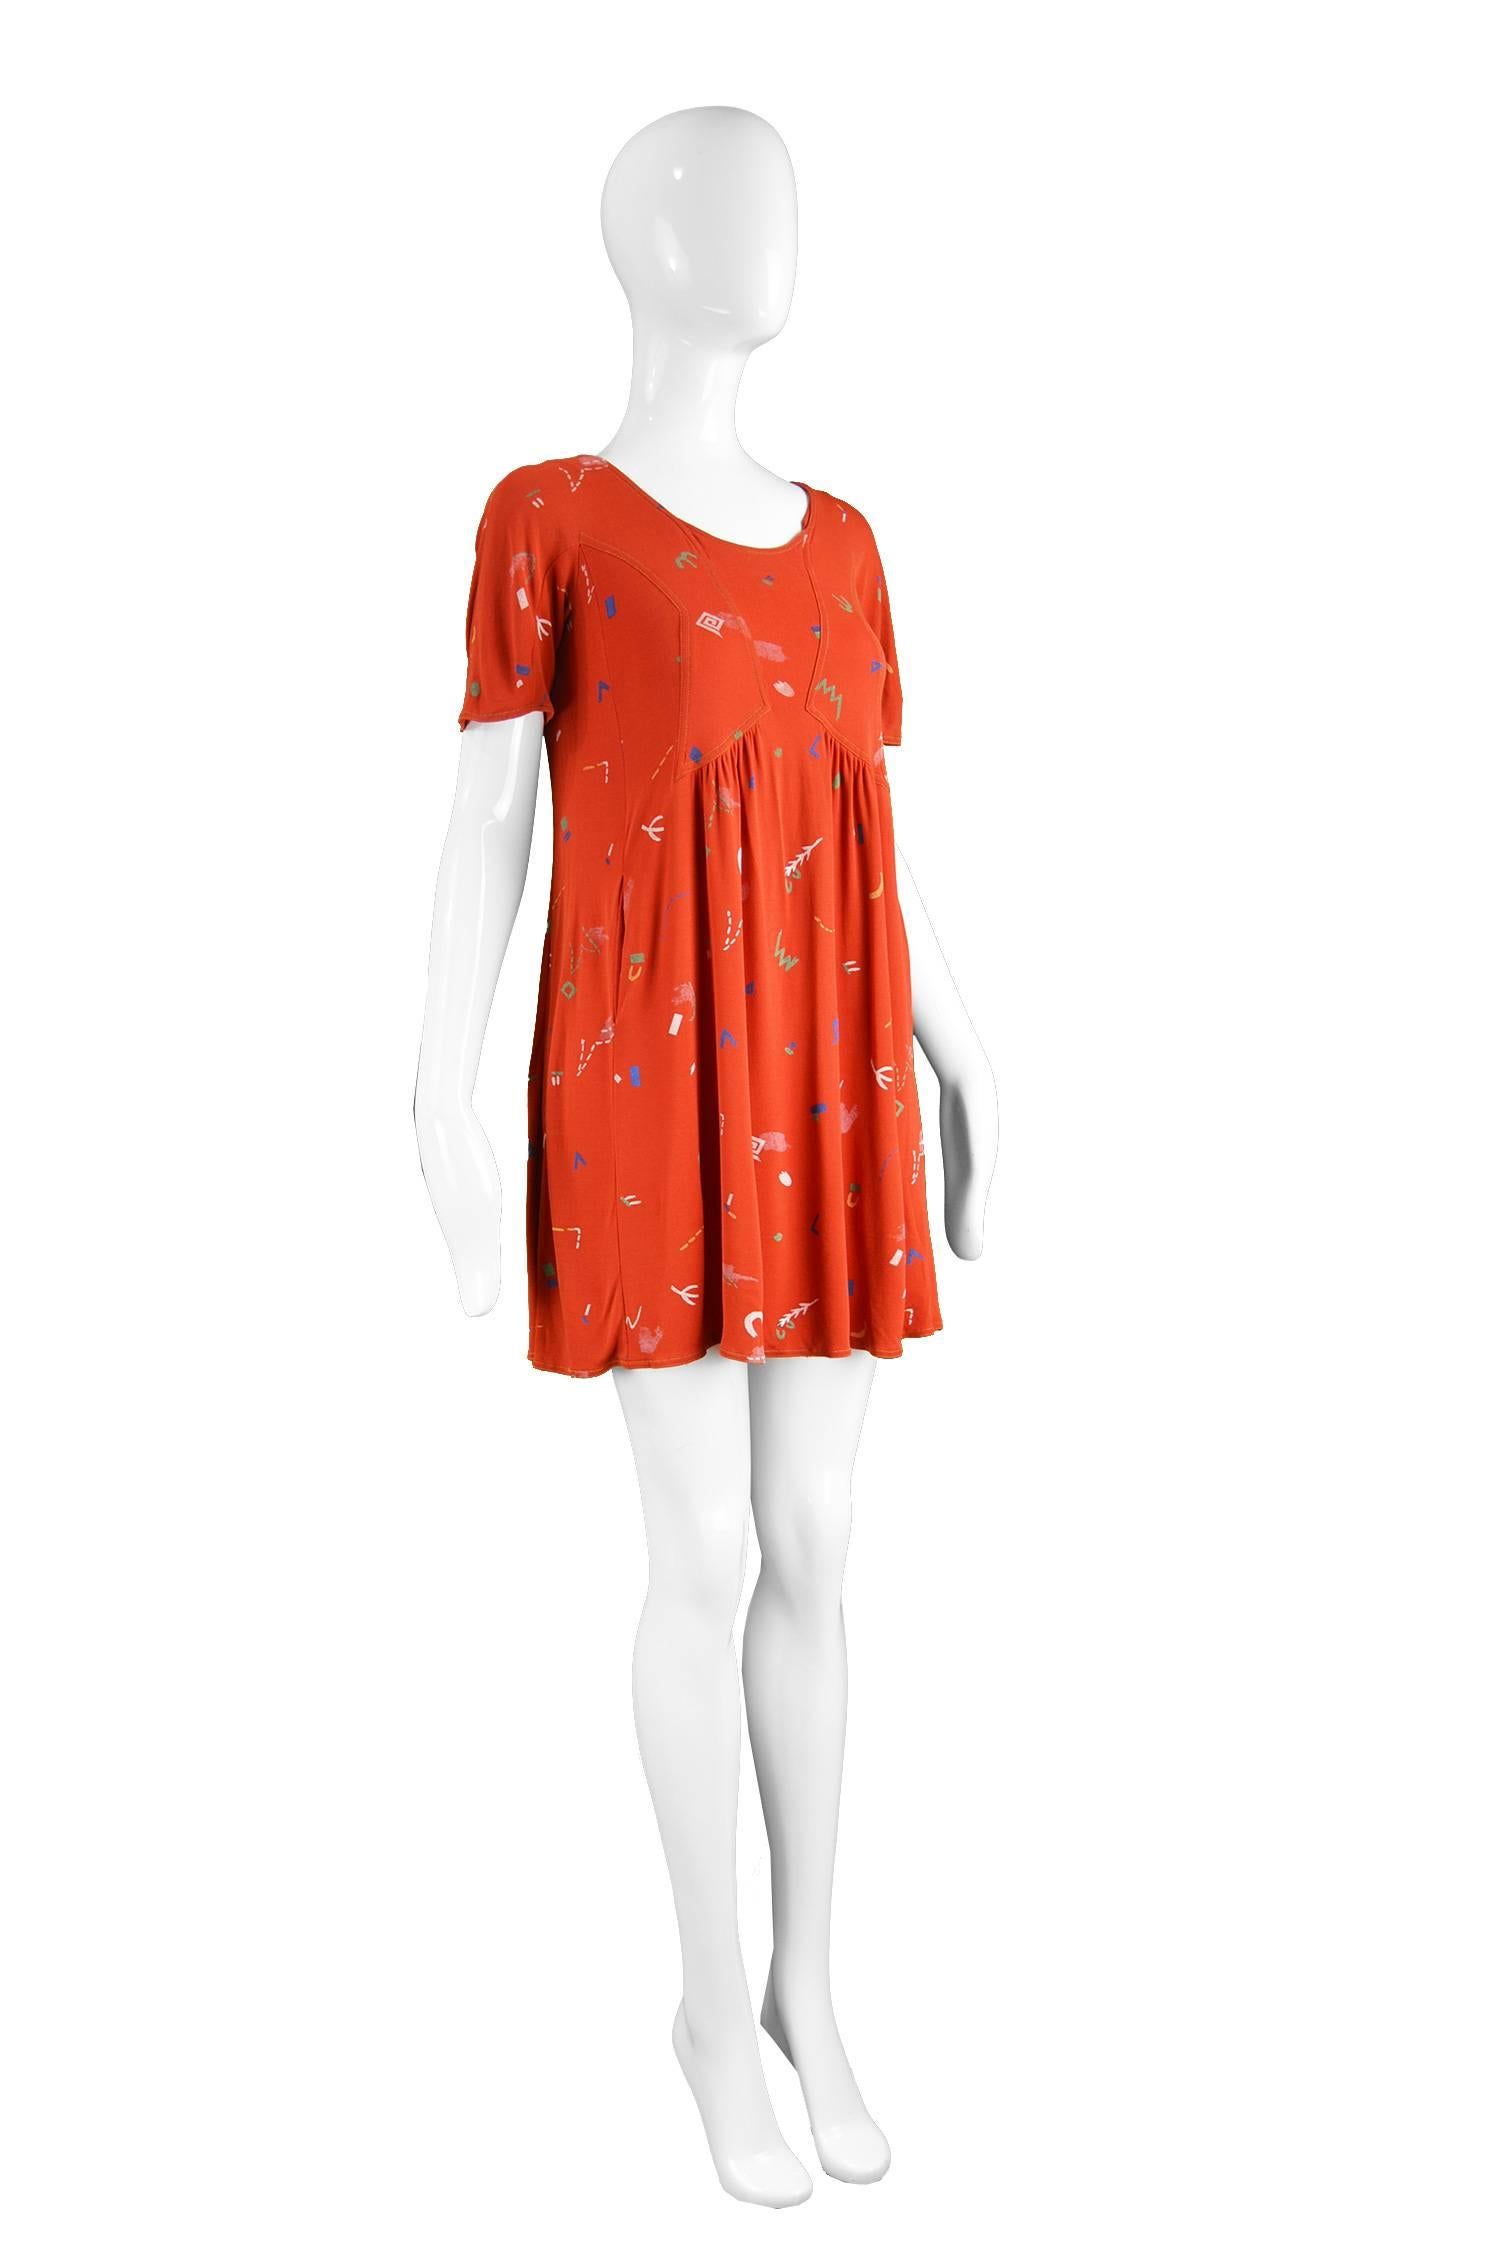 Jean Muir Vogue Featured Vintage Red Atomic Print Matte Jersey Mini Dress, 1976  For Sale 1